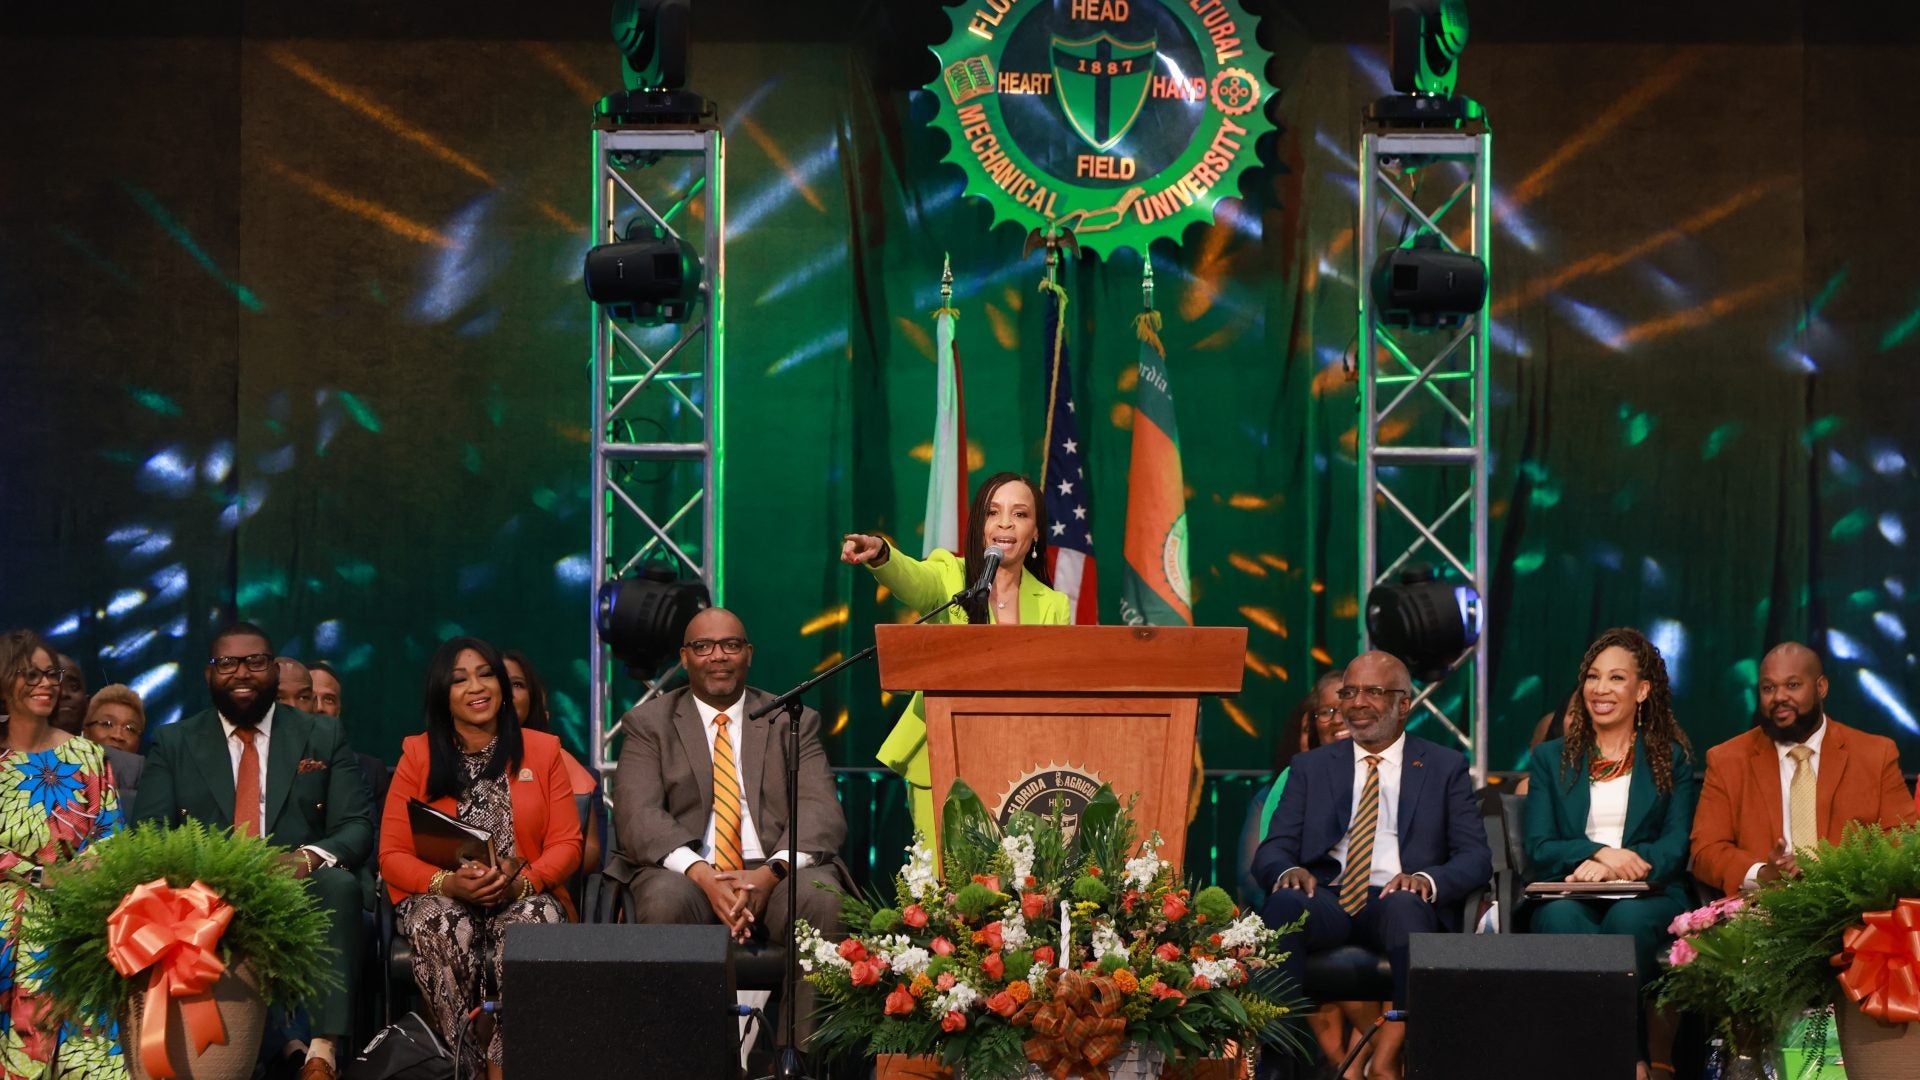 FAMU Gets $1M Grant For Storytellers Fund From Disney